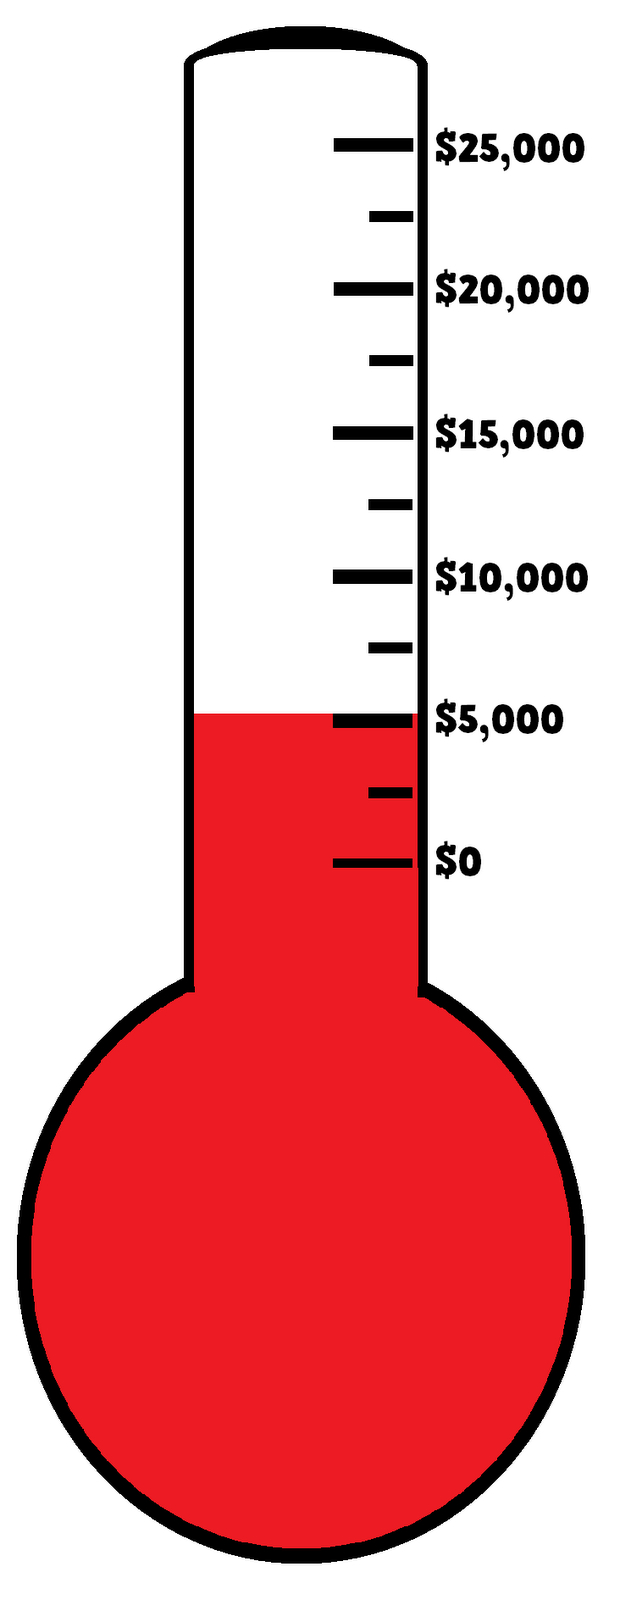 Free Blank Fundraising Thermometer Template, Download Free Clip Art - Free Printable Goal Thermometer Template